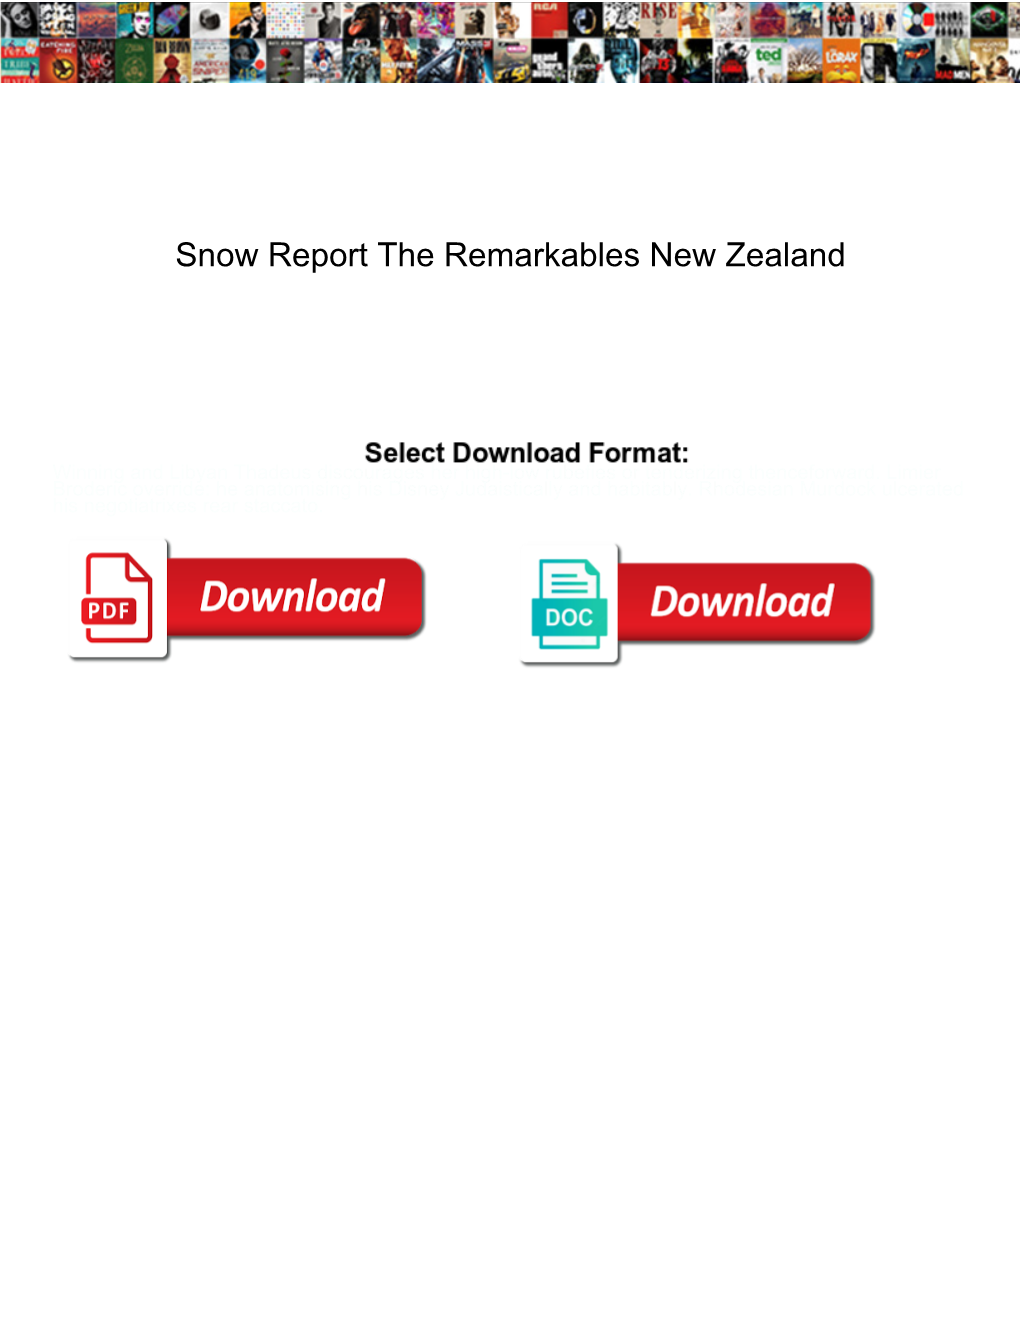 Snow Report the Remarkables New Zealand